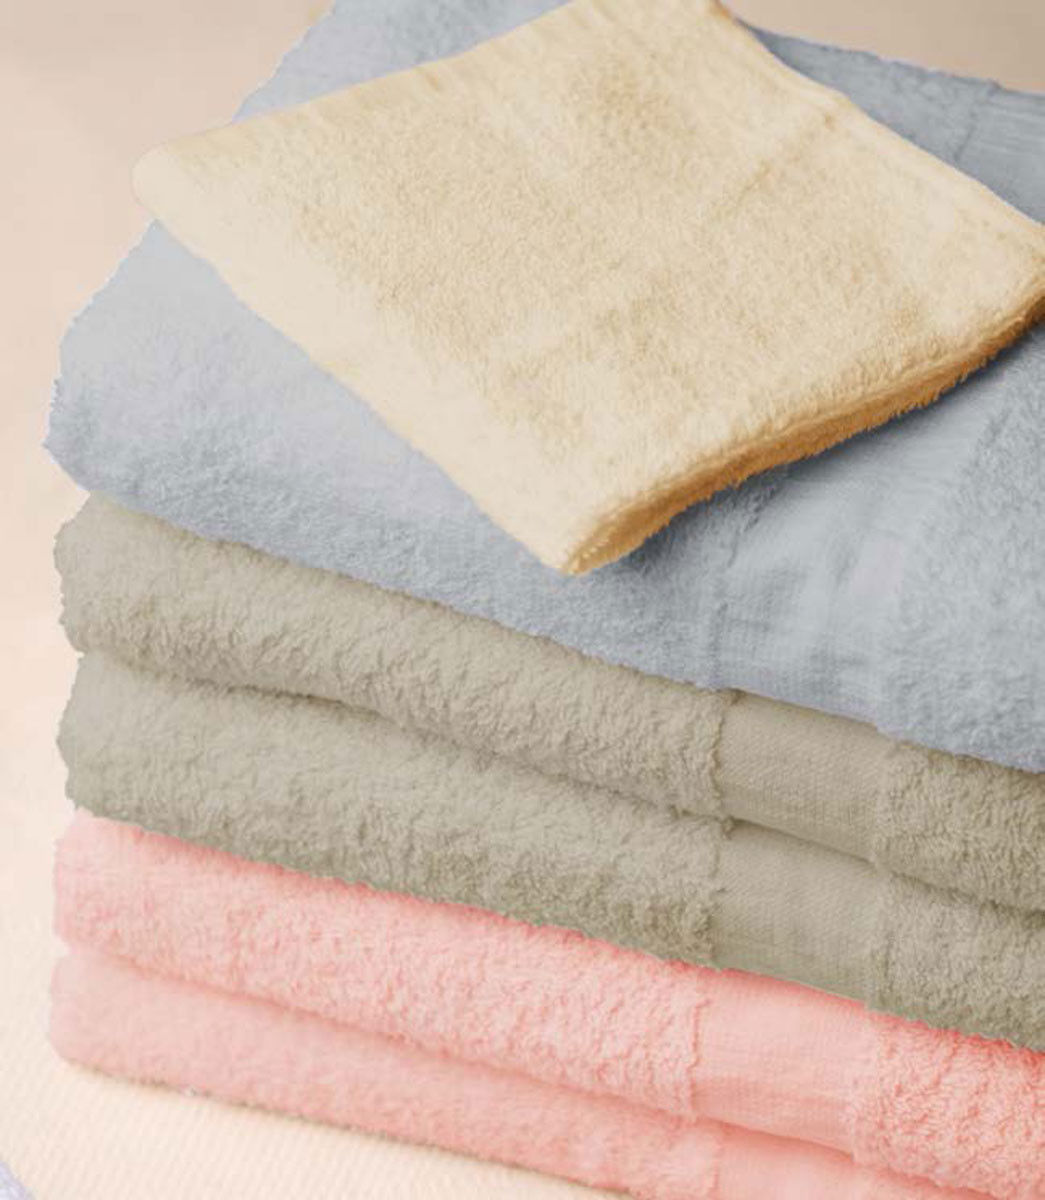 Are these 100 cotton towels of good quality?